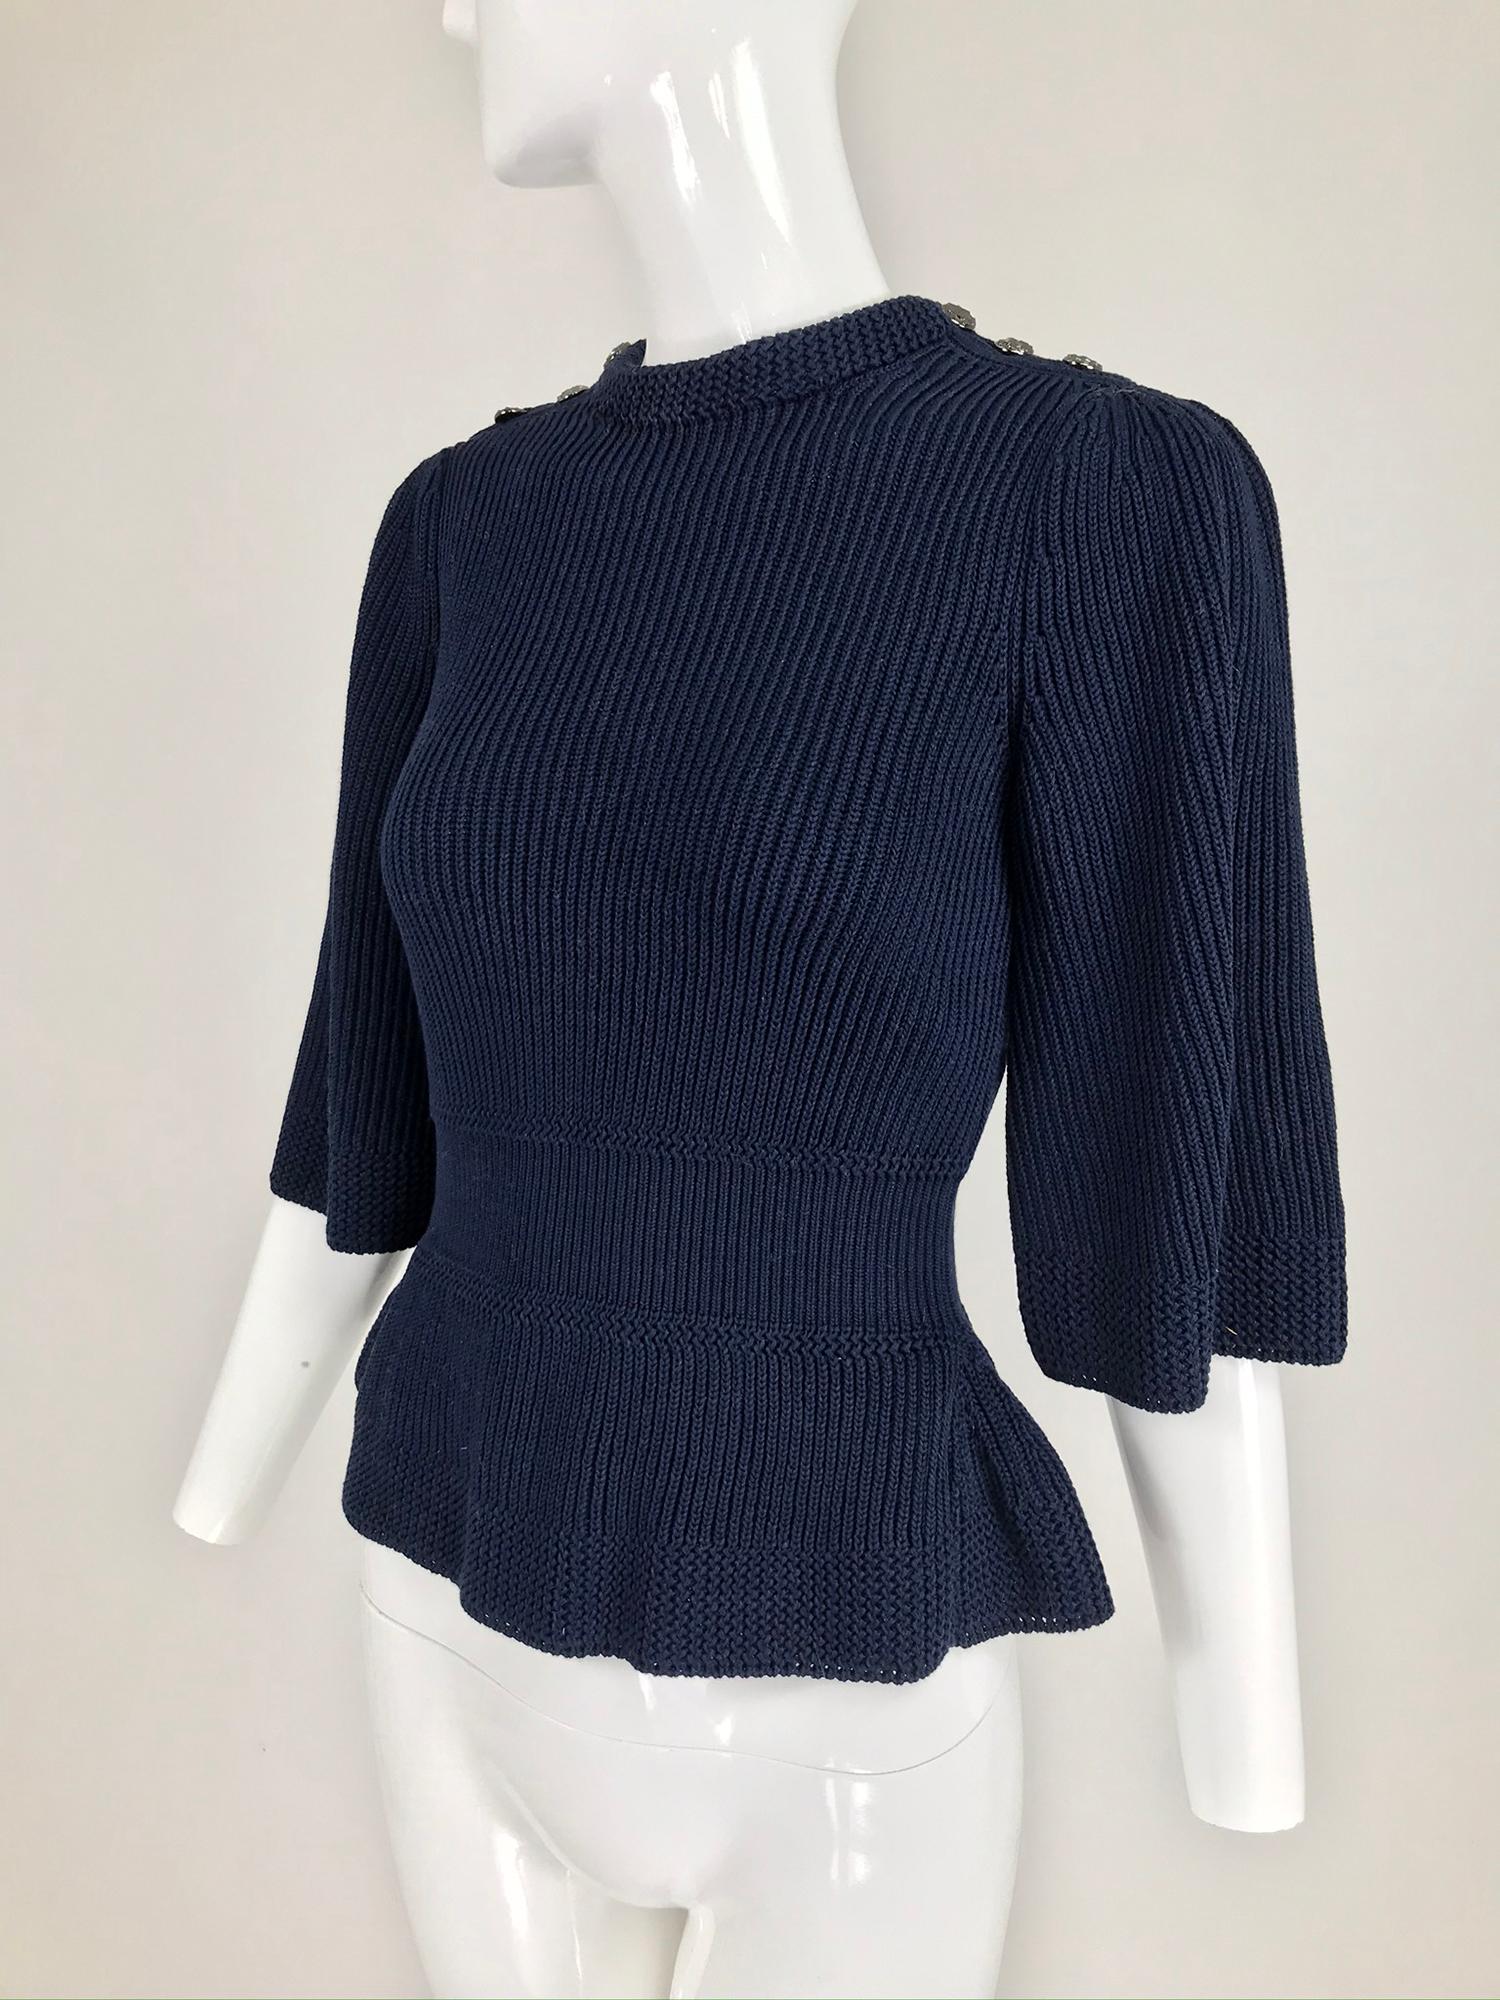 Chanel navy blue chunky cotton knit fitted waist peplum hem sweater with 3/4 length bell sleeves. This beautiful sweater has three working textured dark blue buttons on each shoulder. Marked size 36. Looks barely, if ever worn.
In excellent wearable